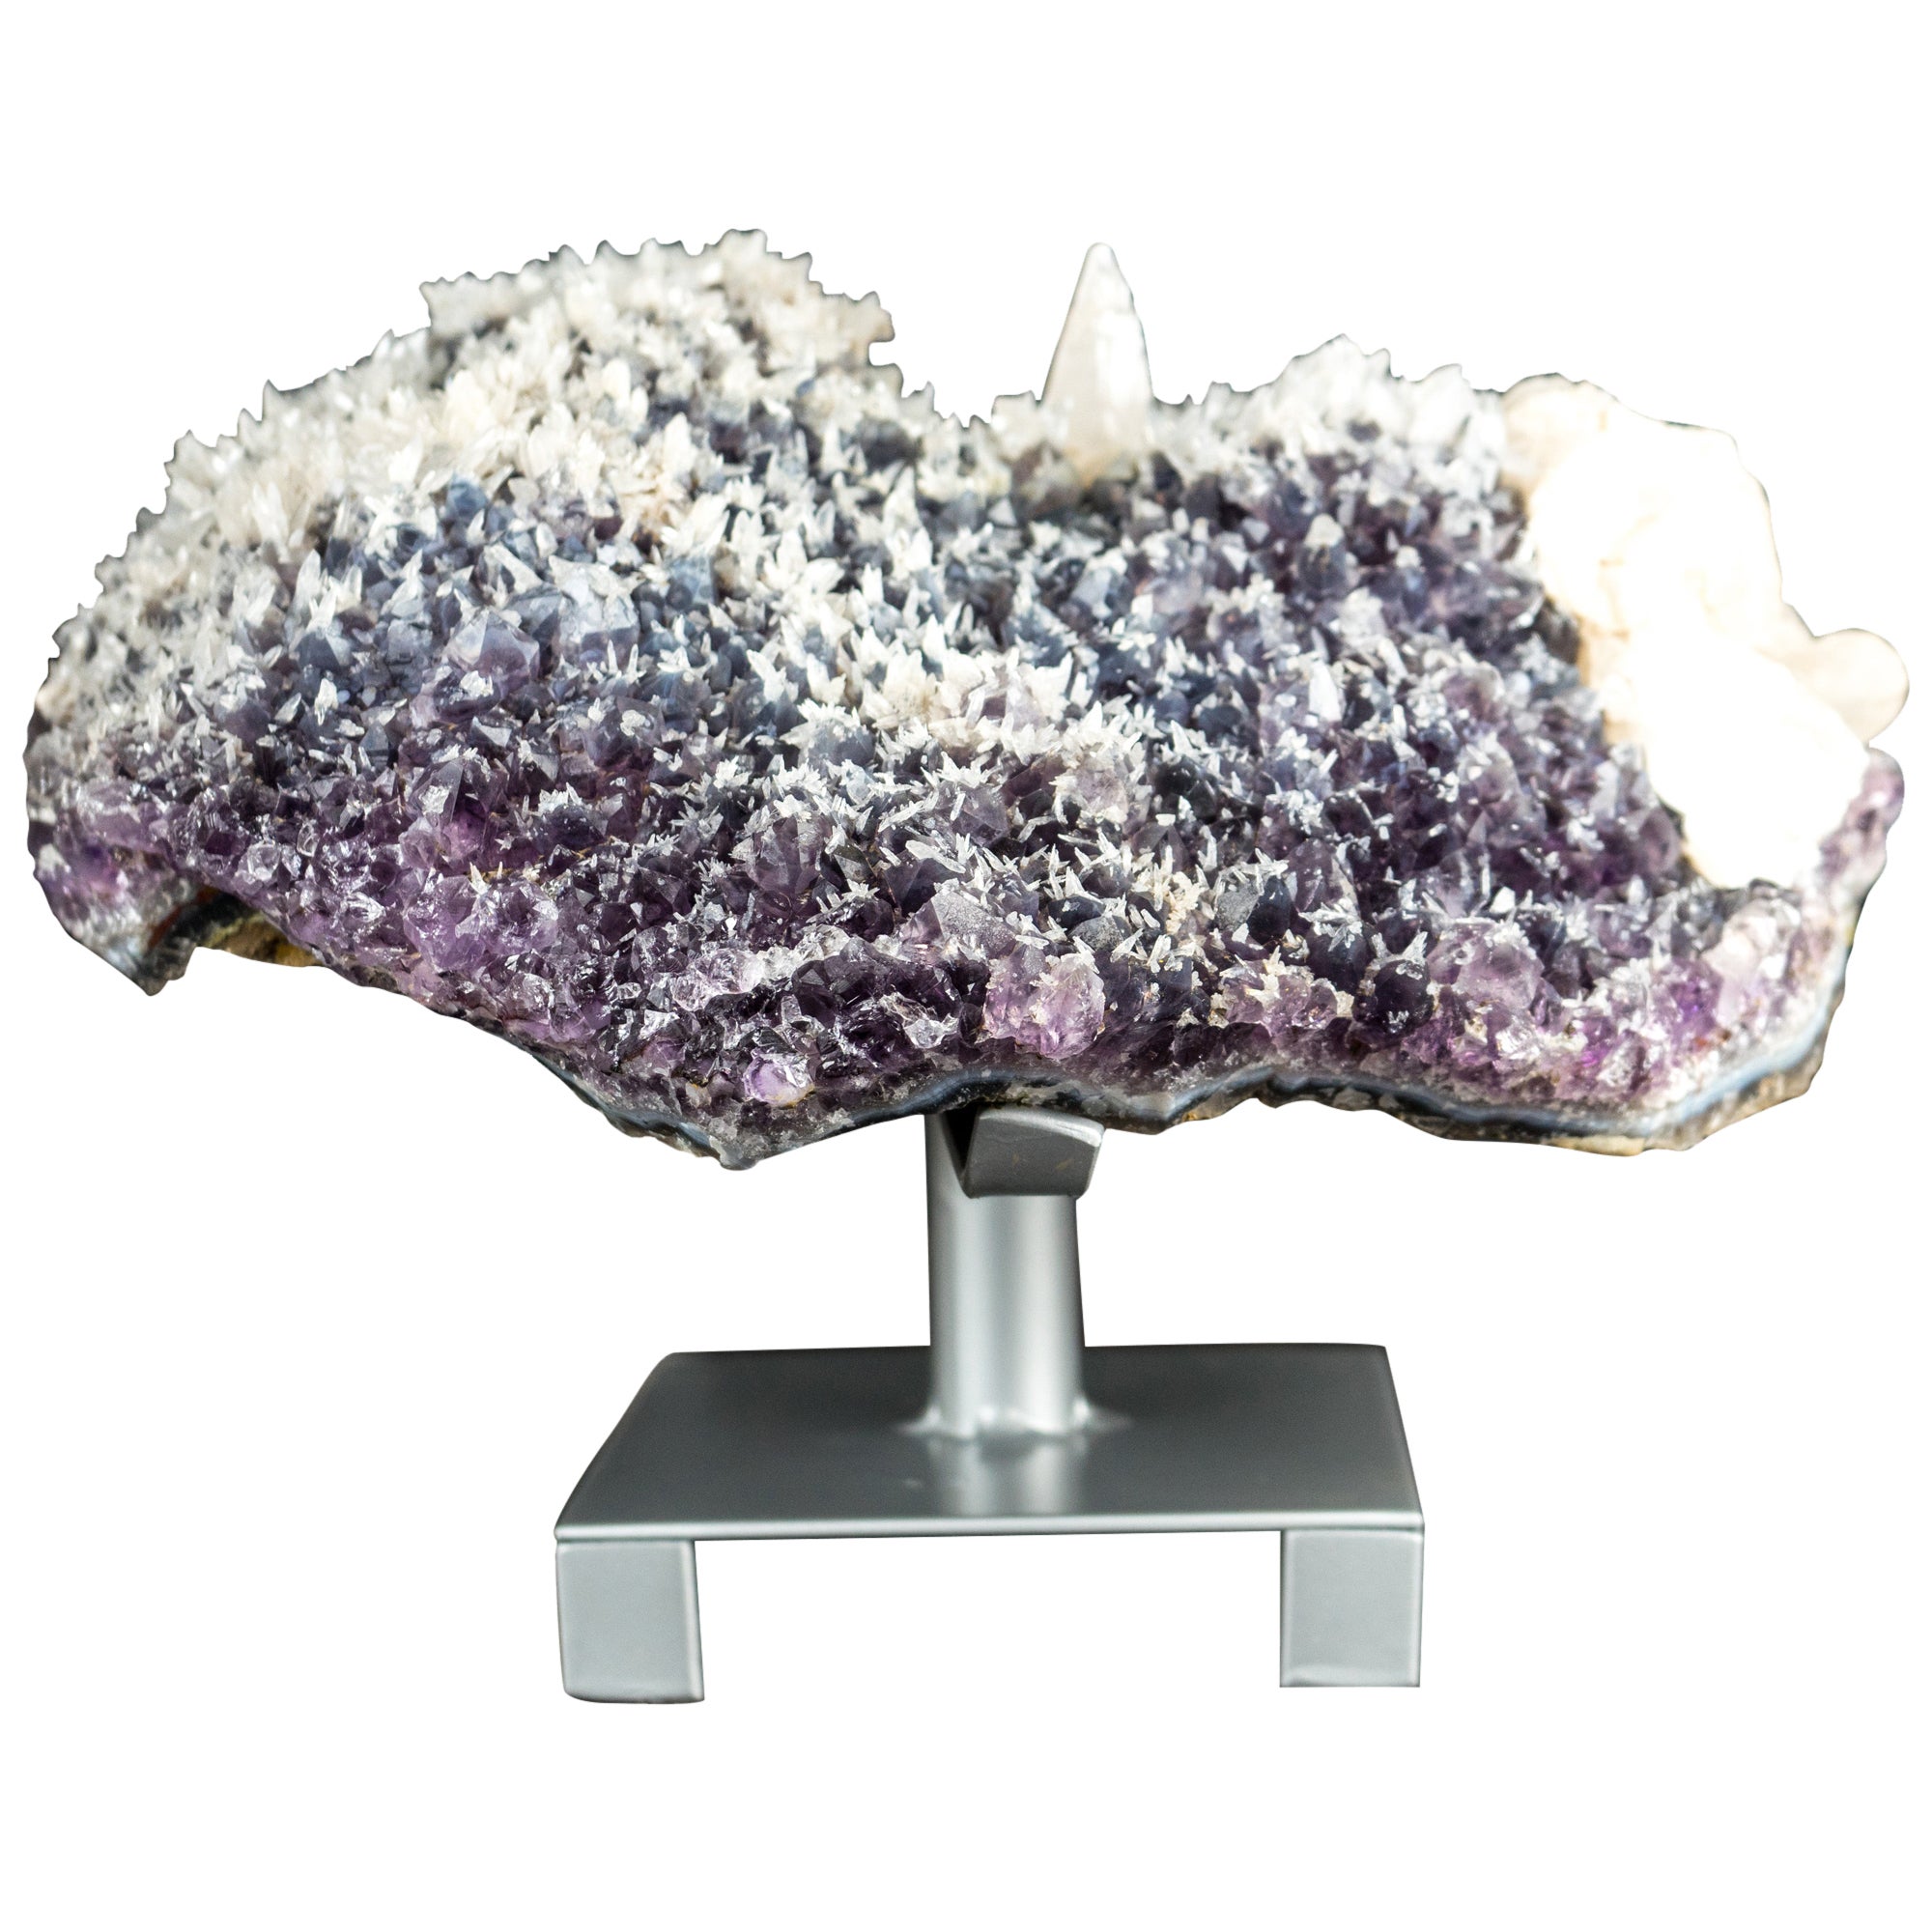 Rare Large Amethyst Geode Flower with Calcite Inclusions & Dark Purple Amethyst